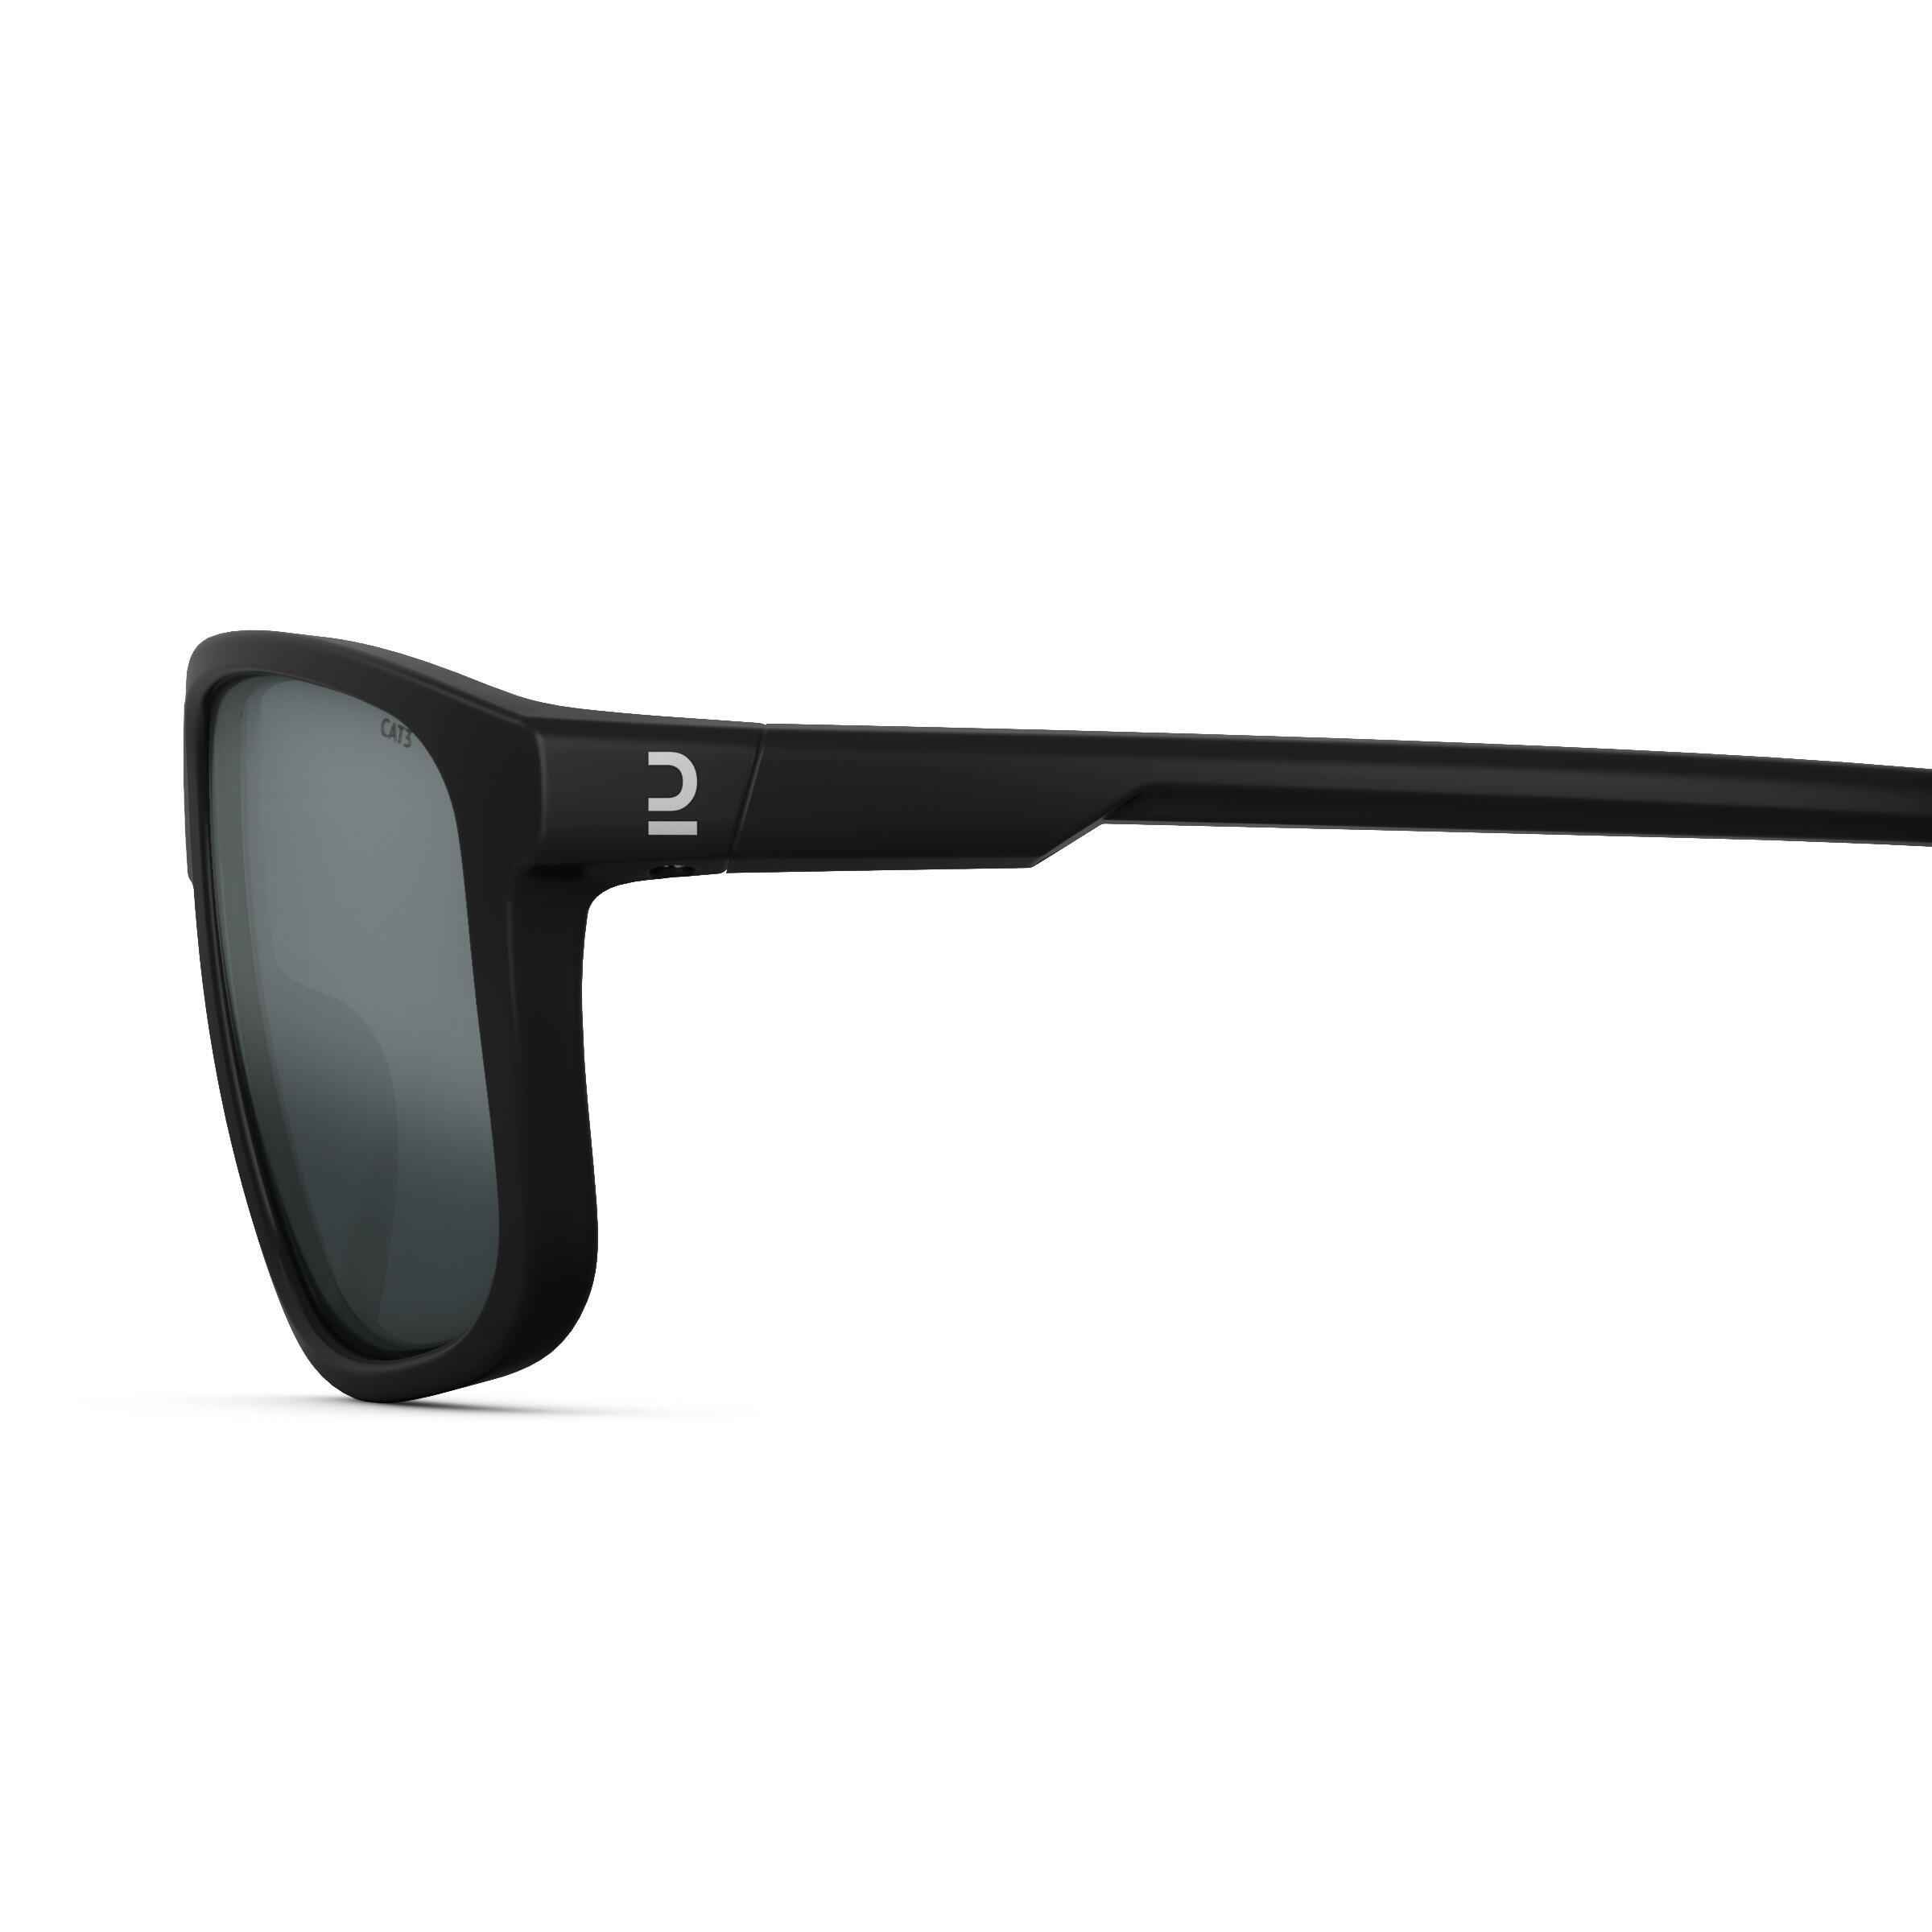 ADULT HIKING SUNGLASSES  MH100  CATEGORY 3 4/9